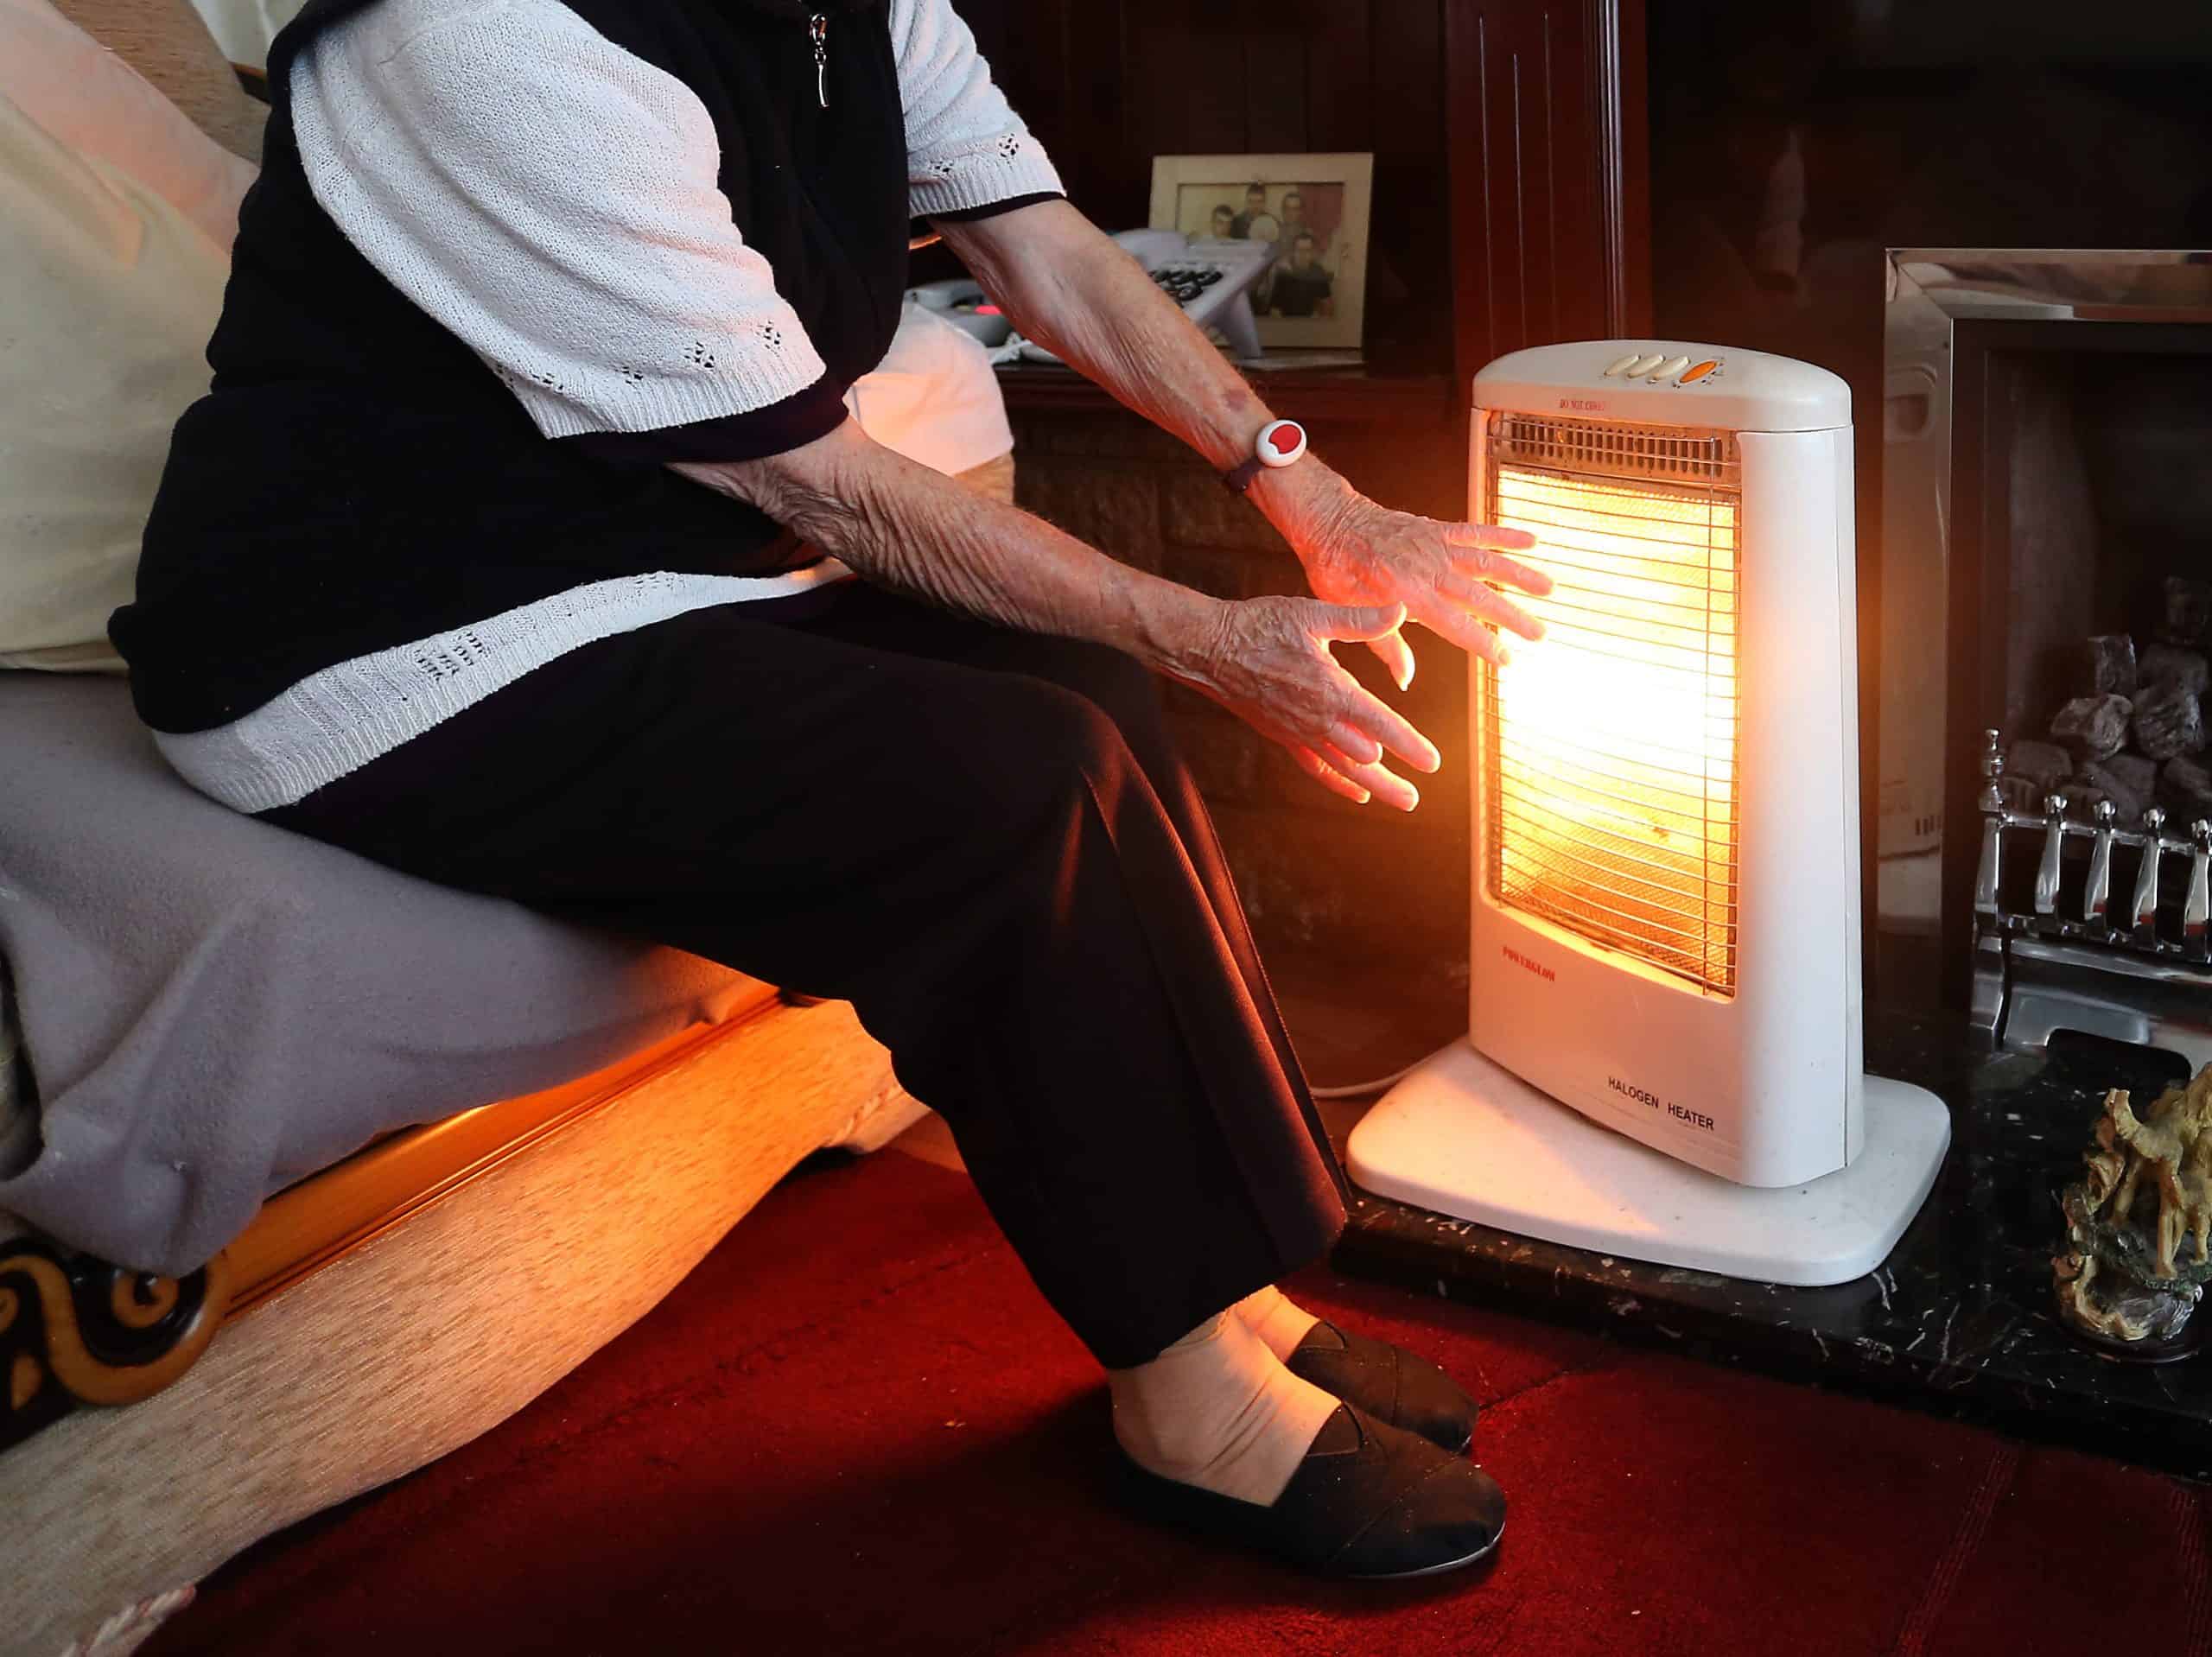 More councils looking at ‘warm banks’ for residents amid rising energy bills